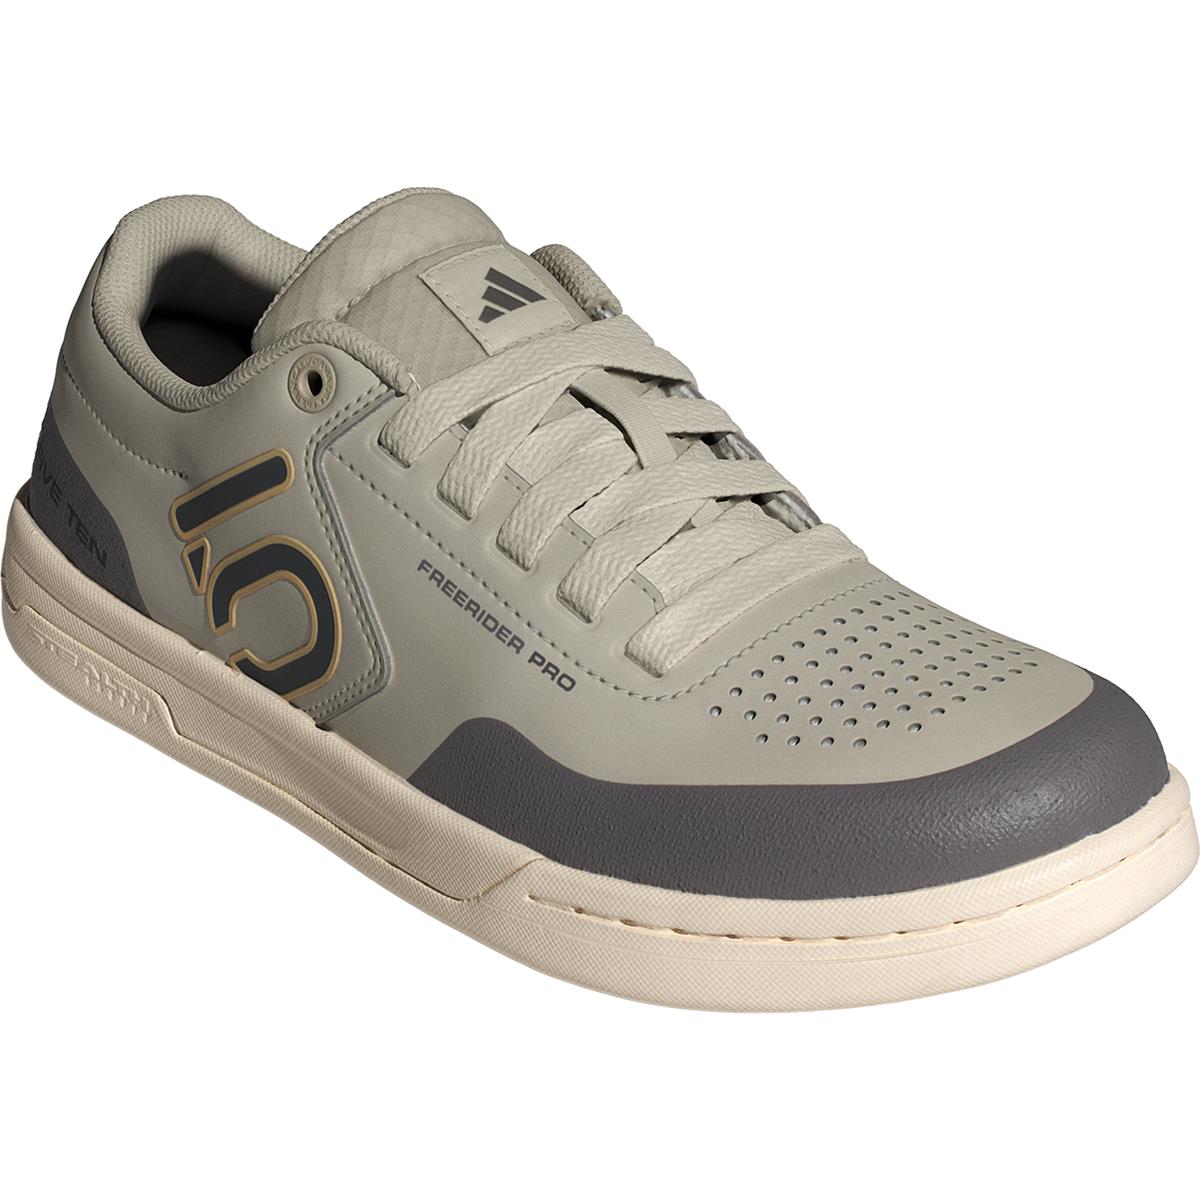 Five Ten Chaussures VTT Freerider Pro Putty Gray/Carbon/Charcoal